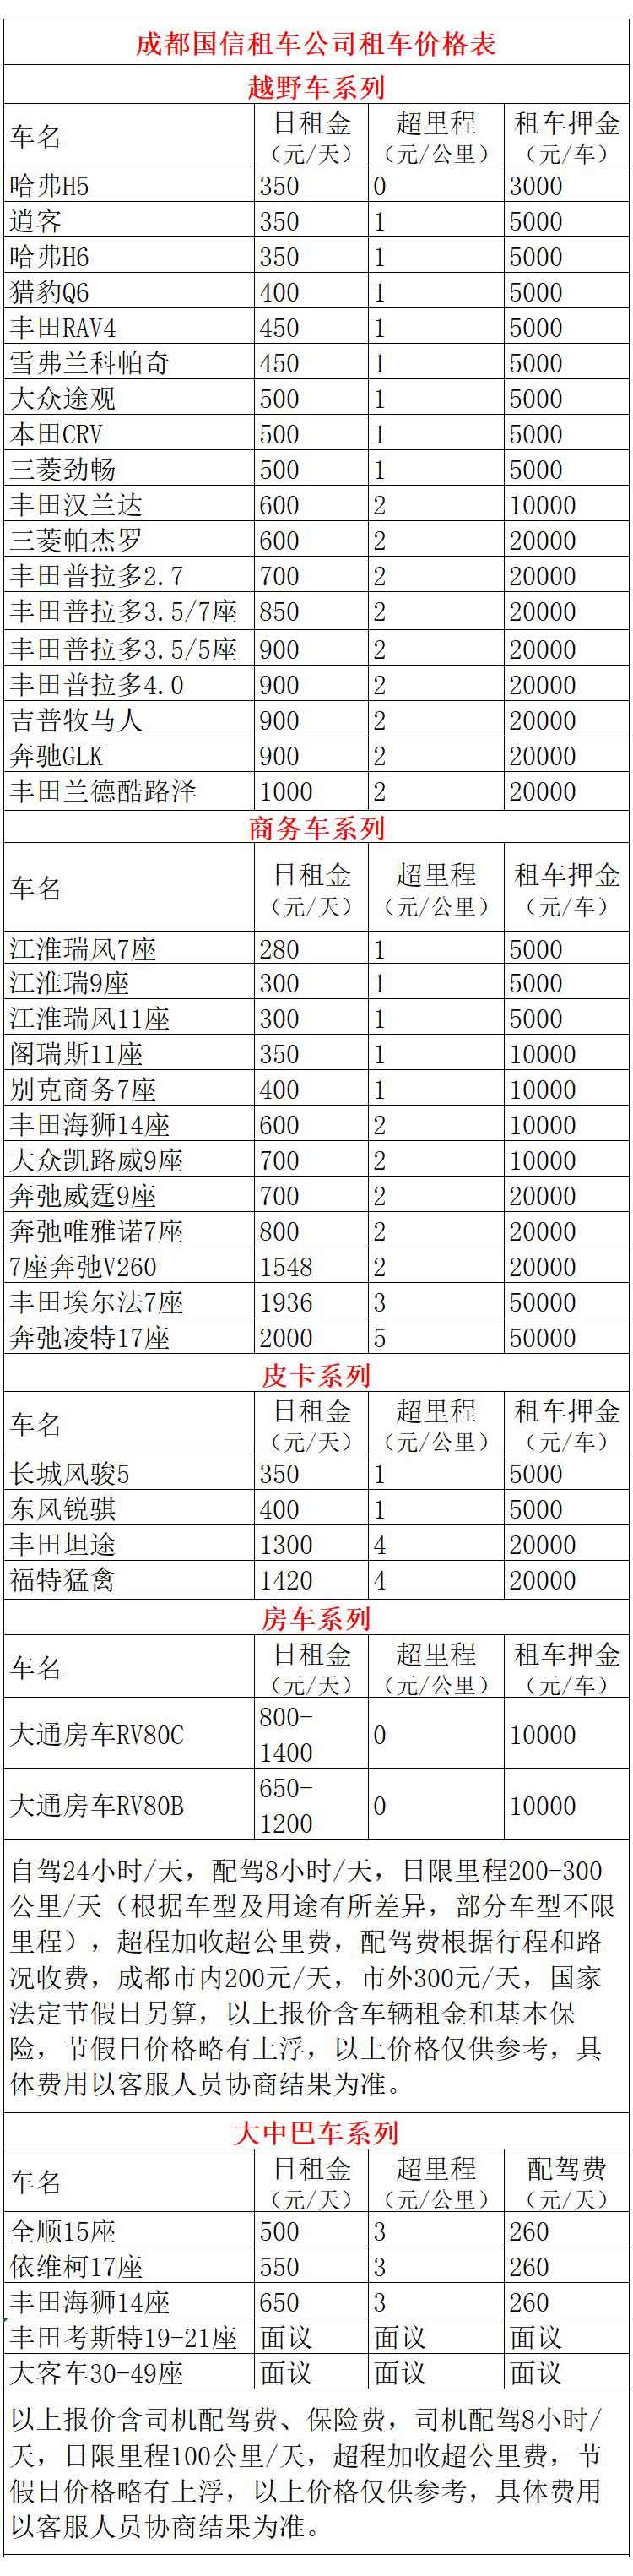 <a href=http://www.czxlvyou.com/czxzc1.html target=_blank class=infotextkey><a href=http://www.czxlvyou.com/ target=_blank class=infotextkey>川藏线自驾</a>租车</a>价格表